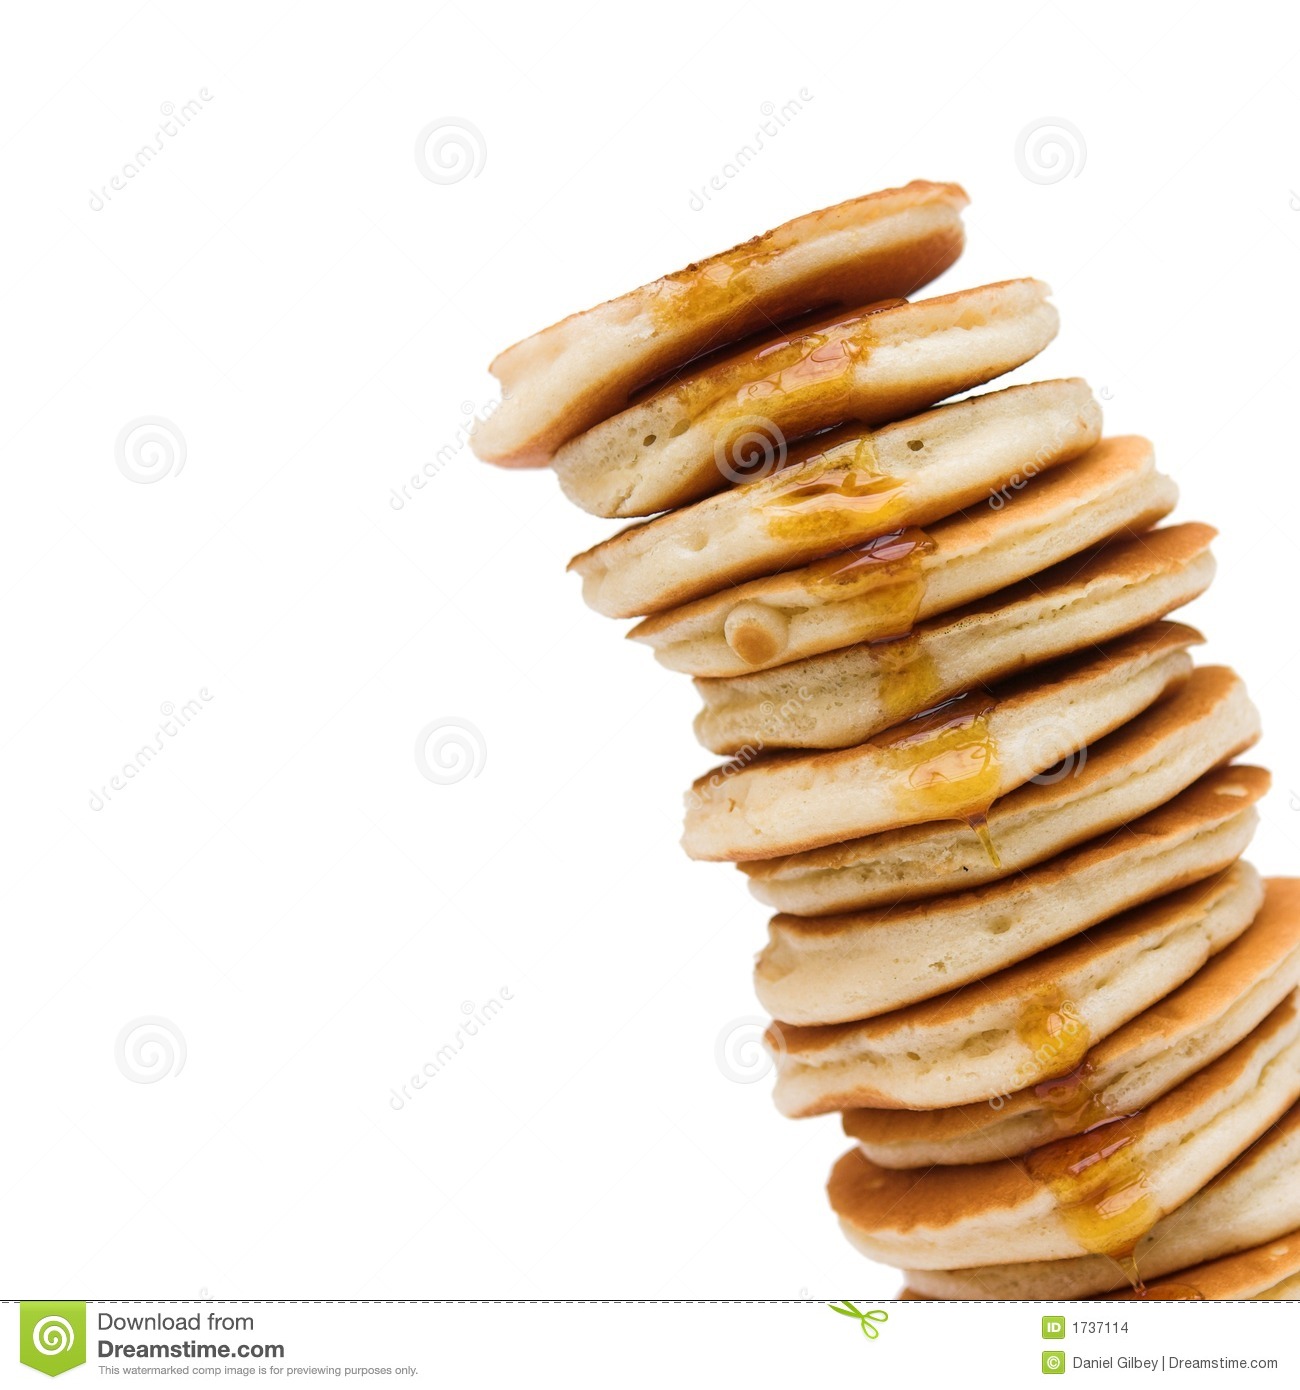 Leaning Tower Of Pancakes Stock Images   Image  1737114